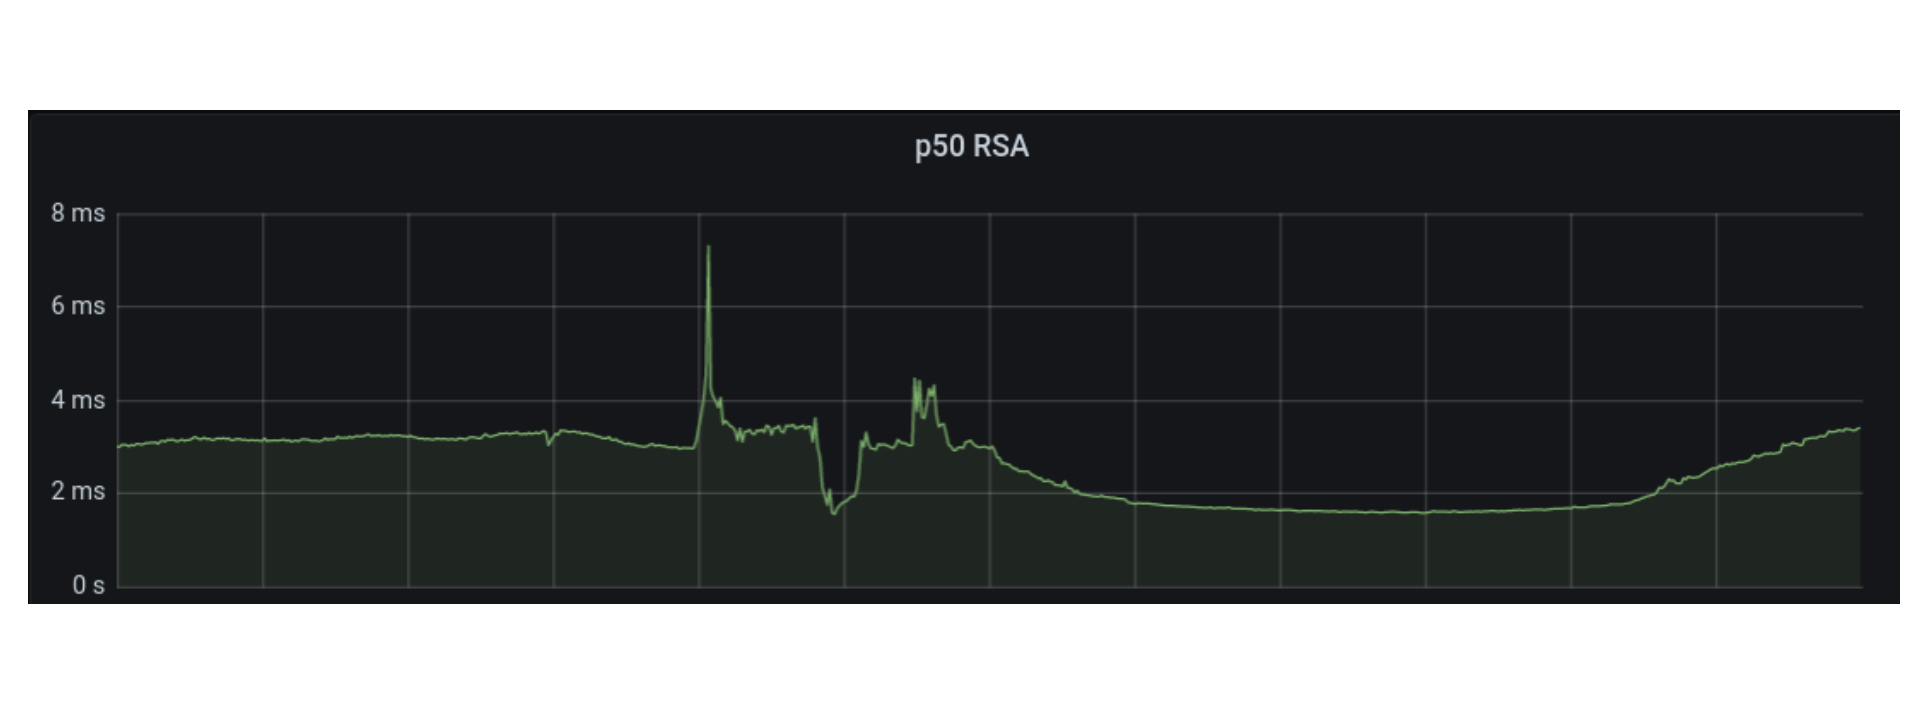 p50 usually under 3ms, during this period went to 8ms